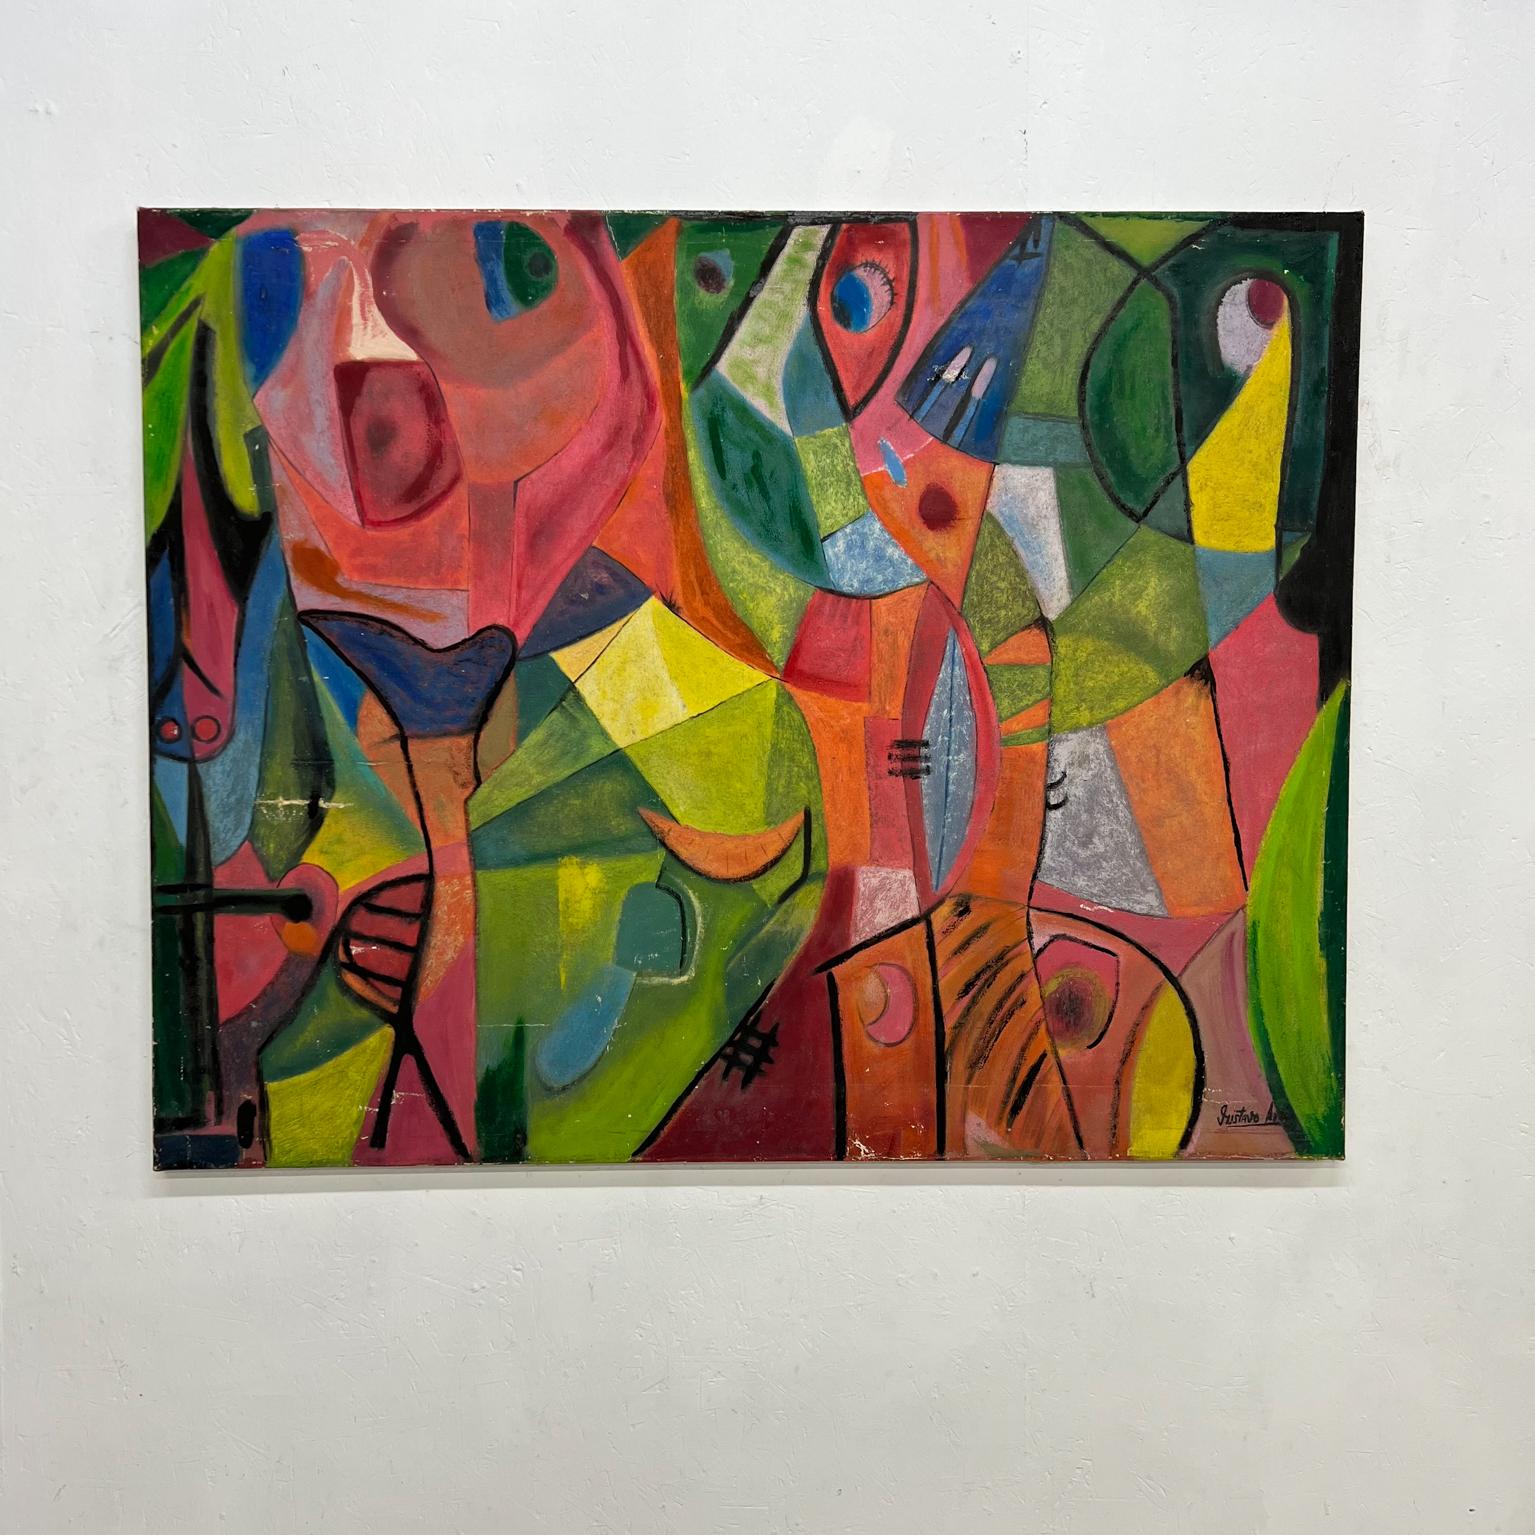 Mexican modern mid 20th century abstract art style of Pedro Coronel
Colorful Oil on Canvas painting
signed Gustavo.
Unable to read last name of artist.
55 x 43.5 x 1 thick.
Preowned original vintage unrestored condition.
Review all images provided.